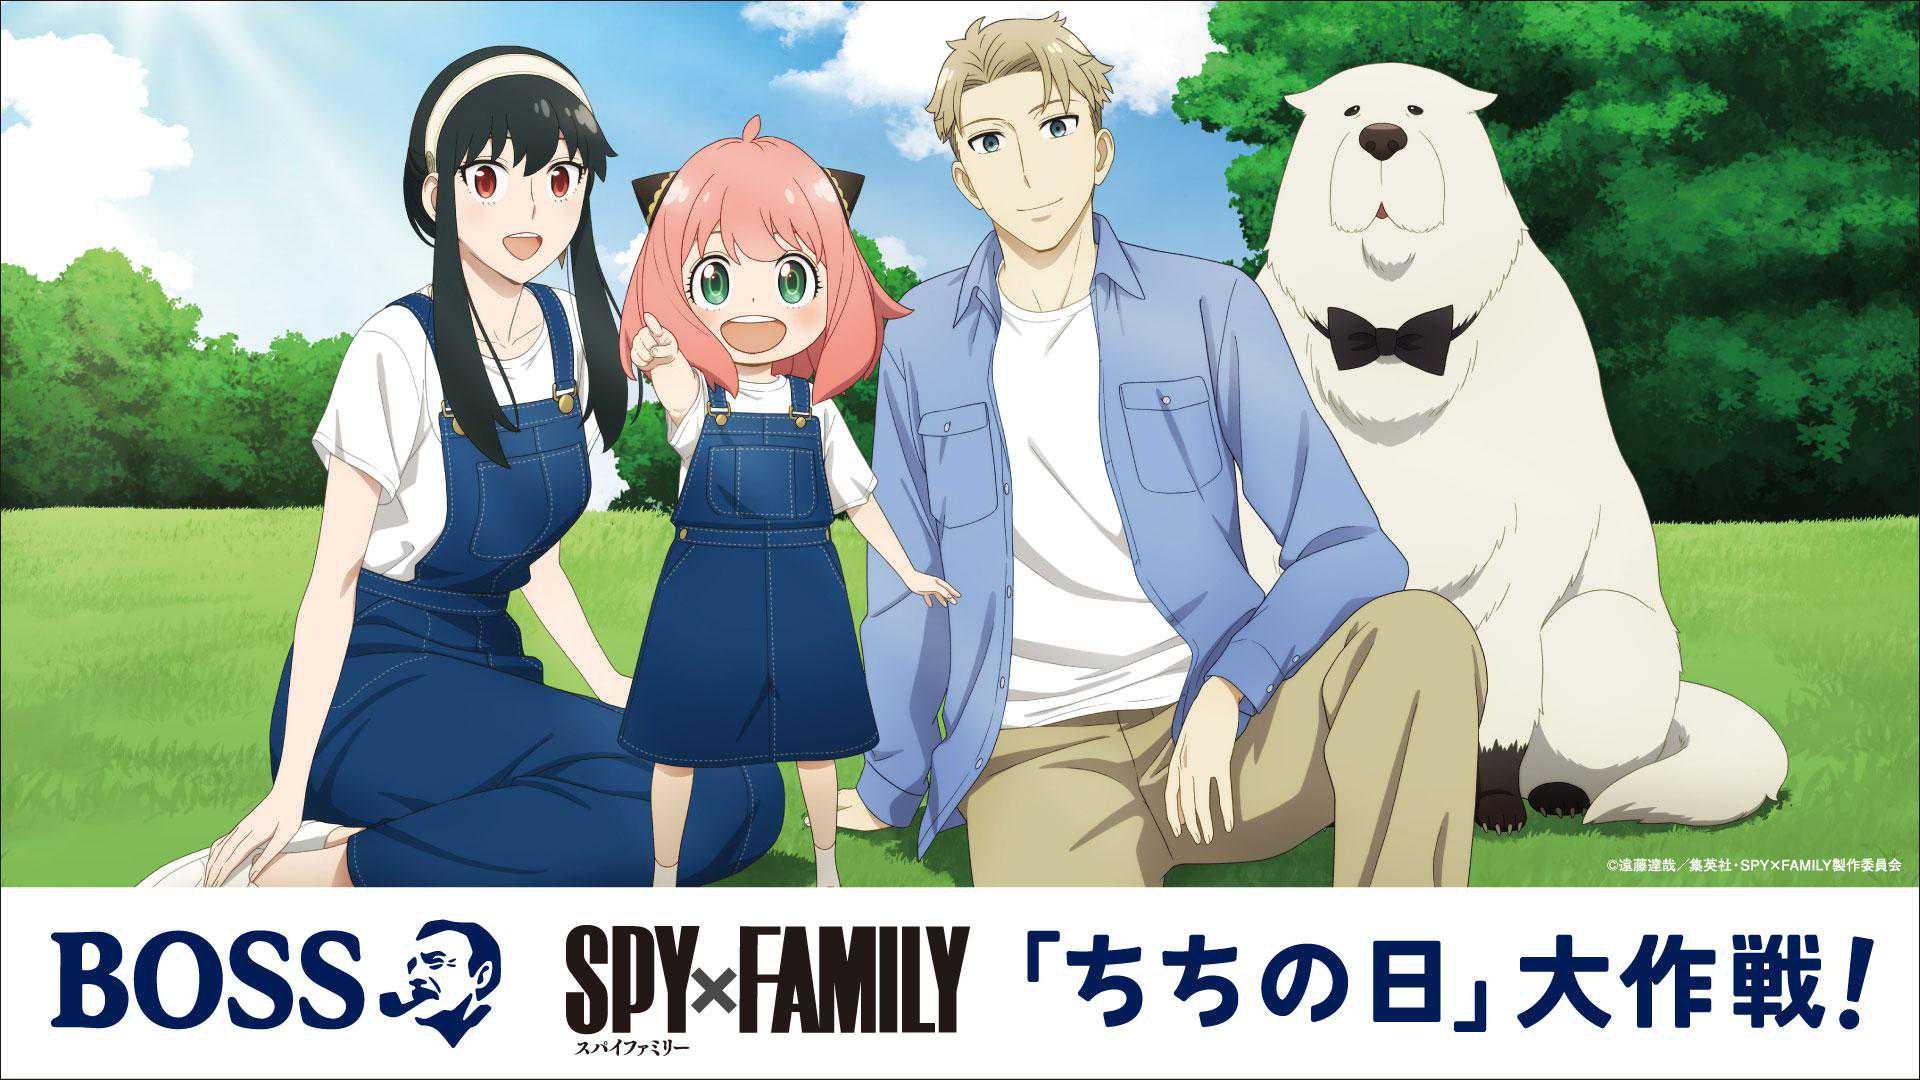 SPY x FAMILY Anime Goes Nuts by Partnering With Boss Coffee for Father’s Day